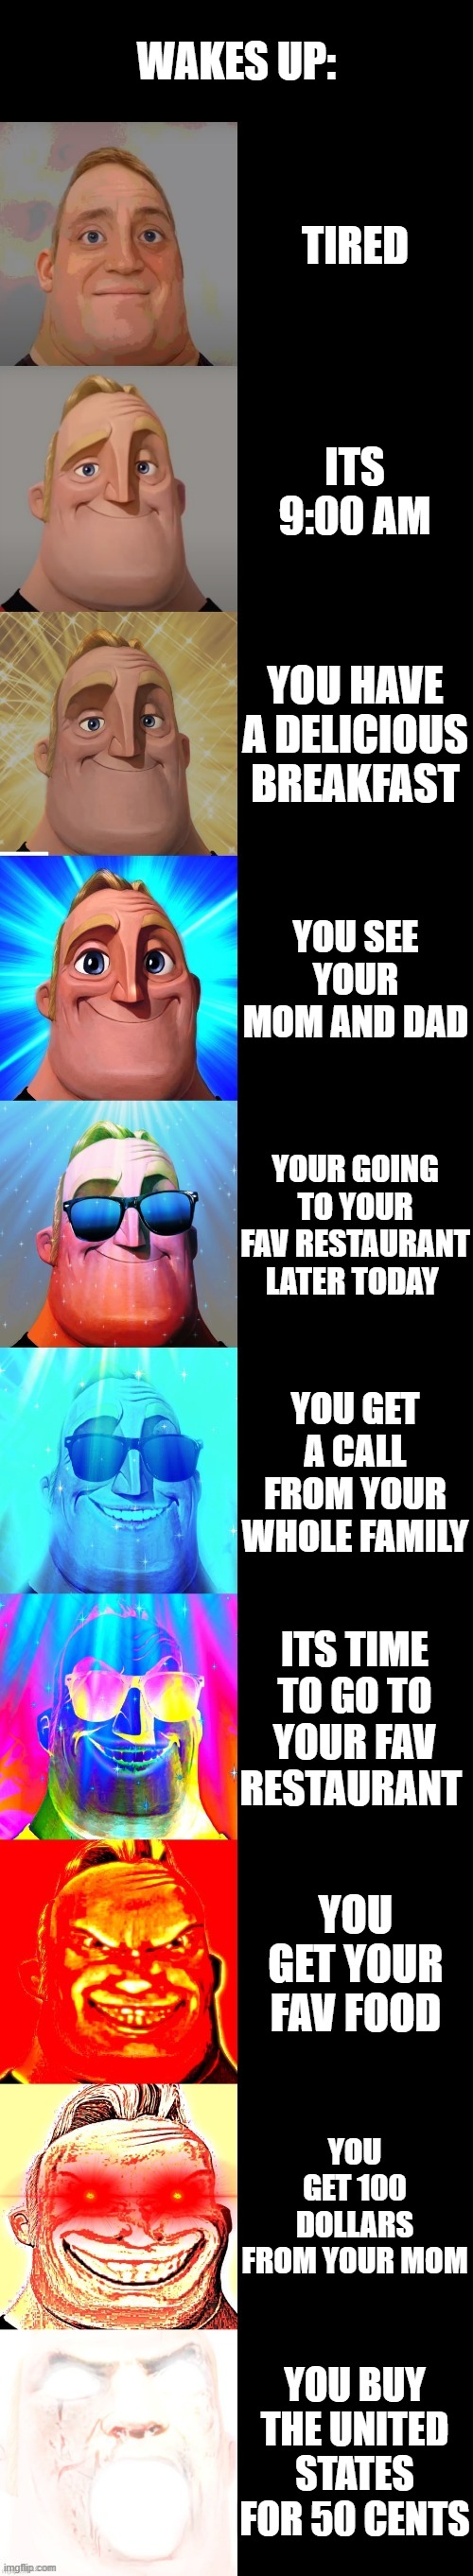 mr incredible becoming canny | WAKES UP:; TIRED; ITS 9:00 AM; YOU HAVE A DELICIOUS BREAKFAST; YOU SEE YOUR MOM AND DAD; YOUR GOING TO YOUR FAV RESTAURANT LATER TODAY; YOU GET A CALL FROM YOUR WHOLE FAMILY; ITS TIME TO GO TO YOUR FAV RESTAURANT; YOU GET YOUR FAV FOOD; YOU GET 100 DOLLARS FROM YOUR MOM; YOU BUY THE UNITED STATES FOR 50 CENTS | image tagged in mr incredible becoming canny | made w/ Imgflip meme maker